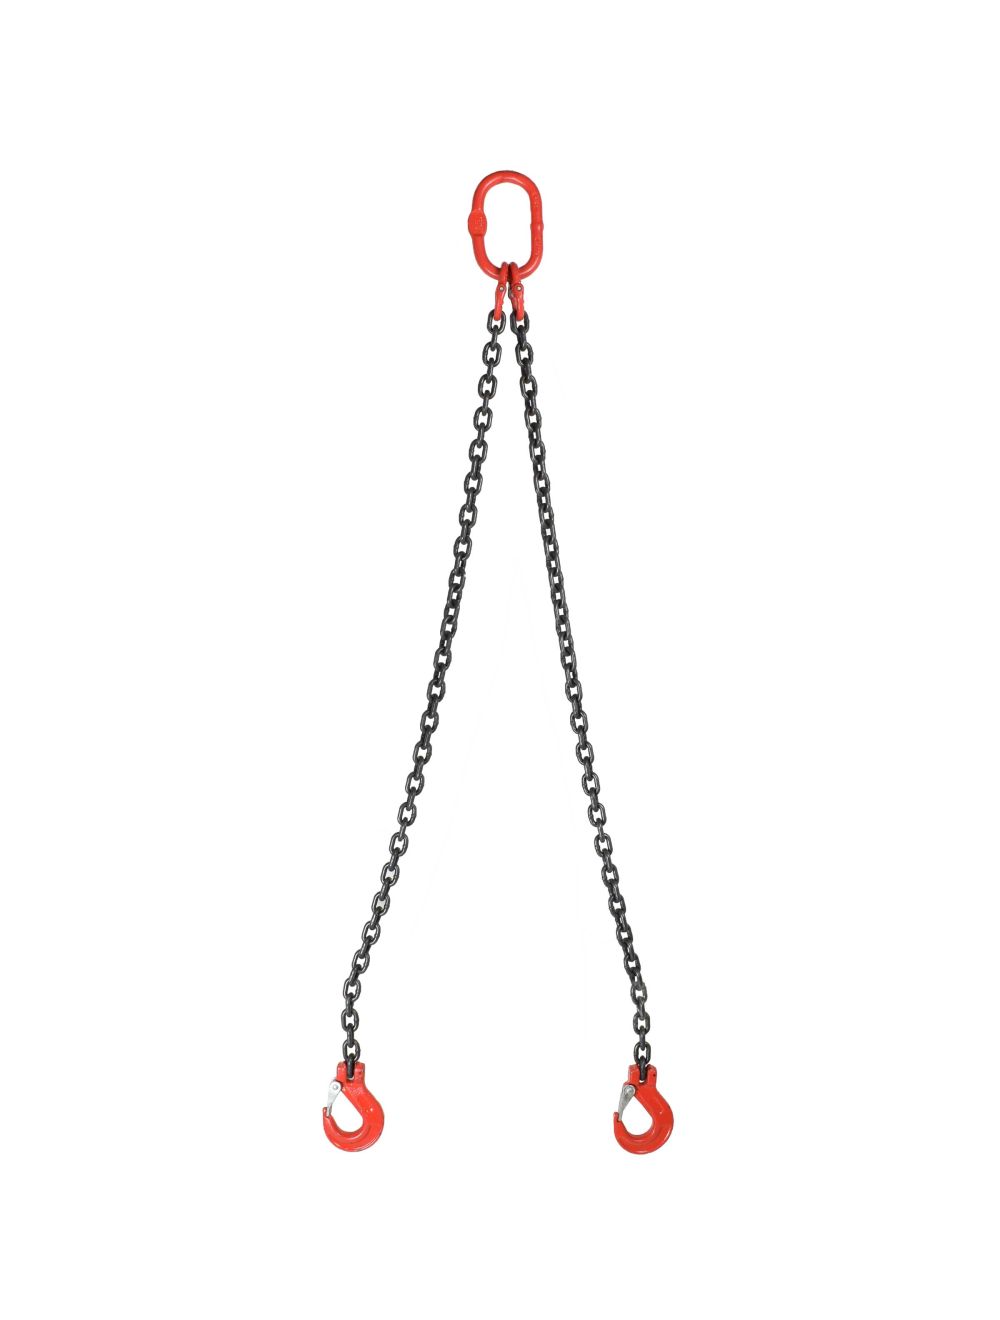 Pewag 7/32Inch X 10 Ft Type Ados Adjustable 2-Leg Grade 100 Chain Sling 4700 Lbs Wll 